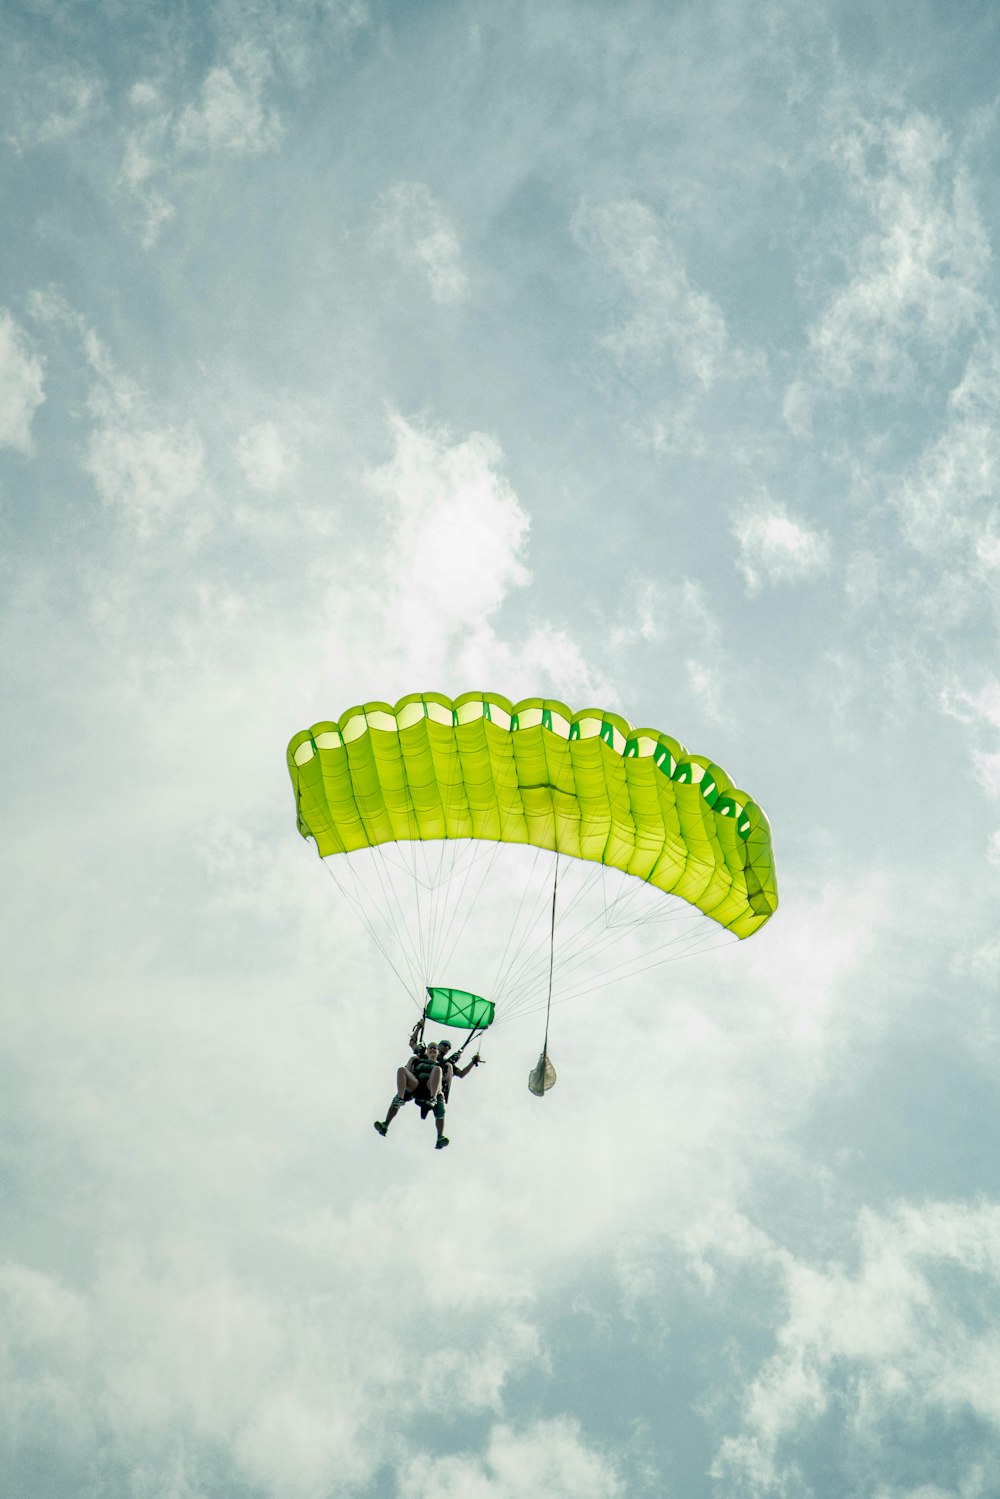 a person is parasailing in the air on a cloudy day